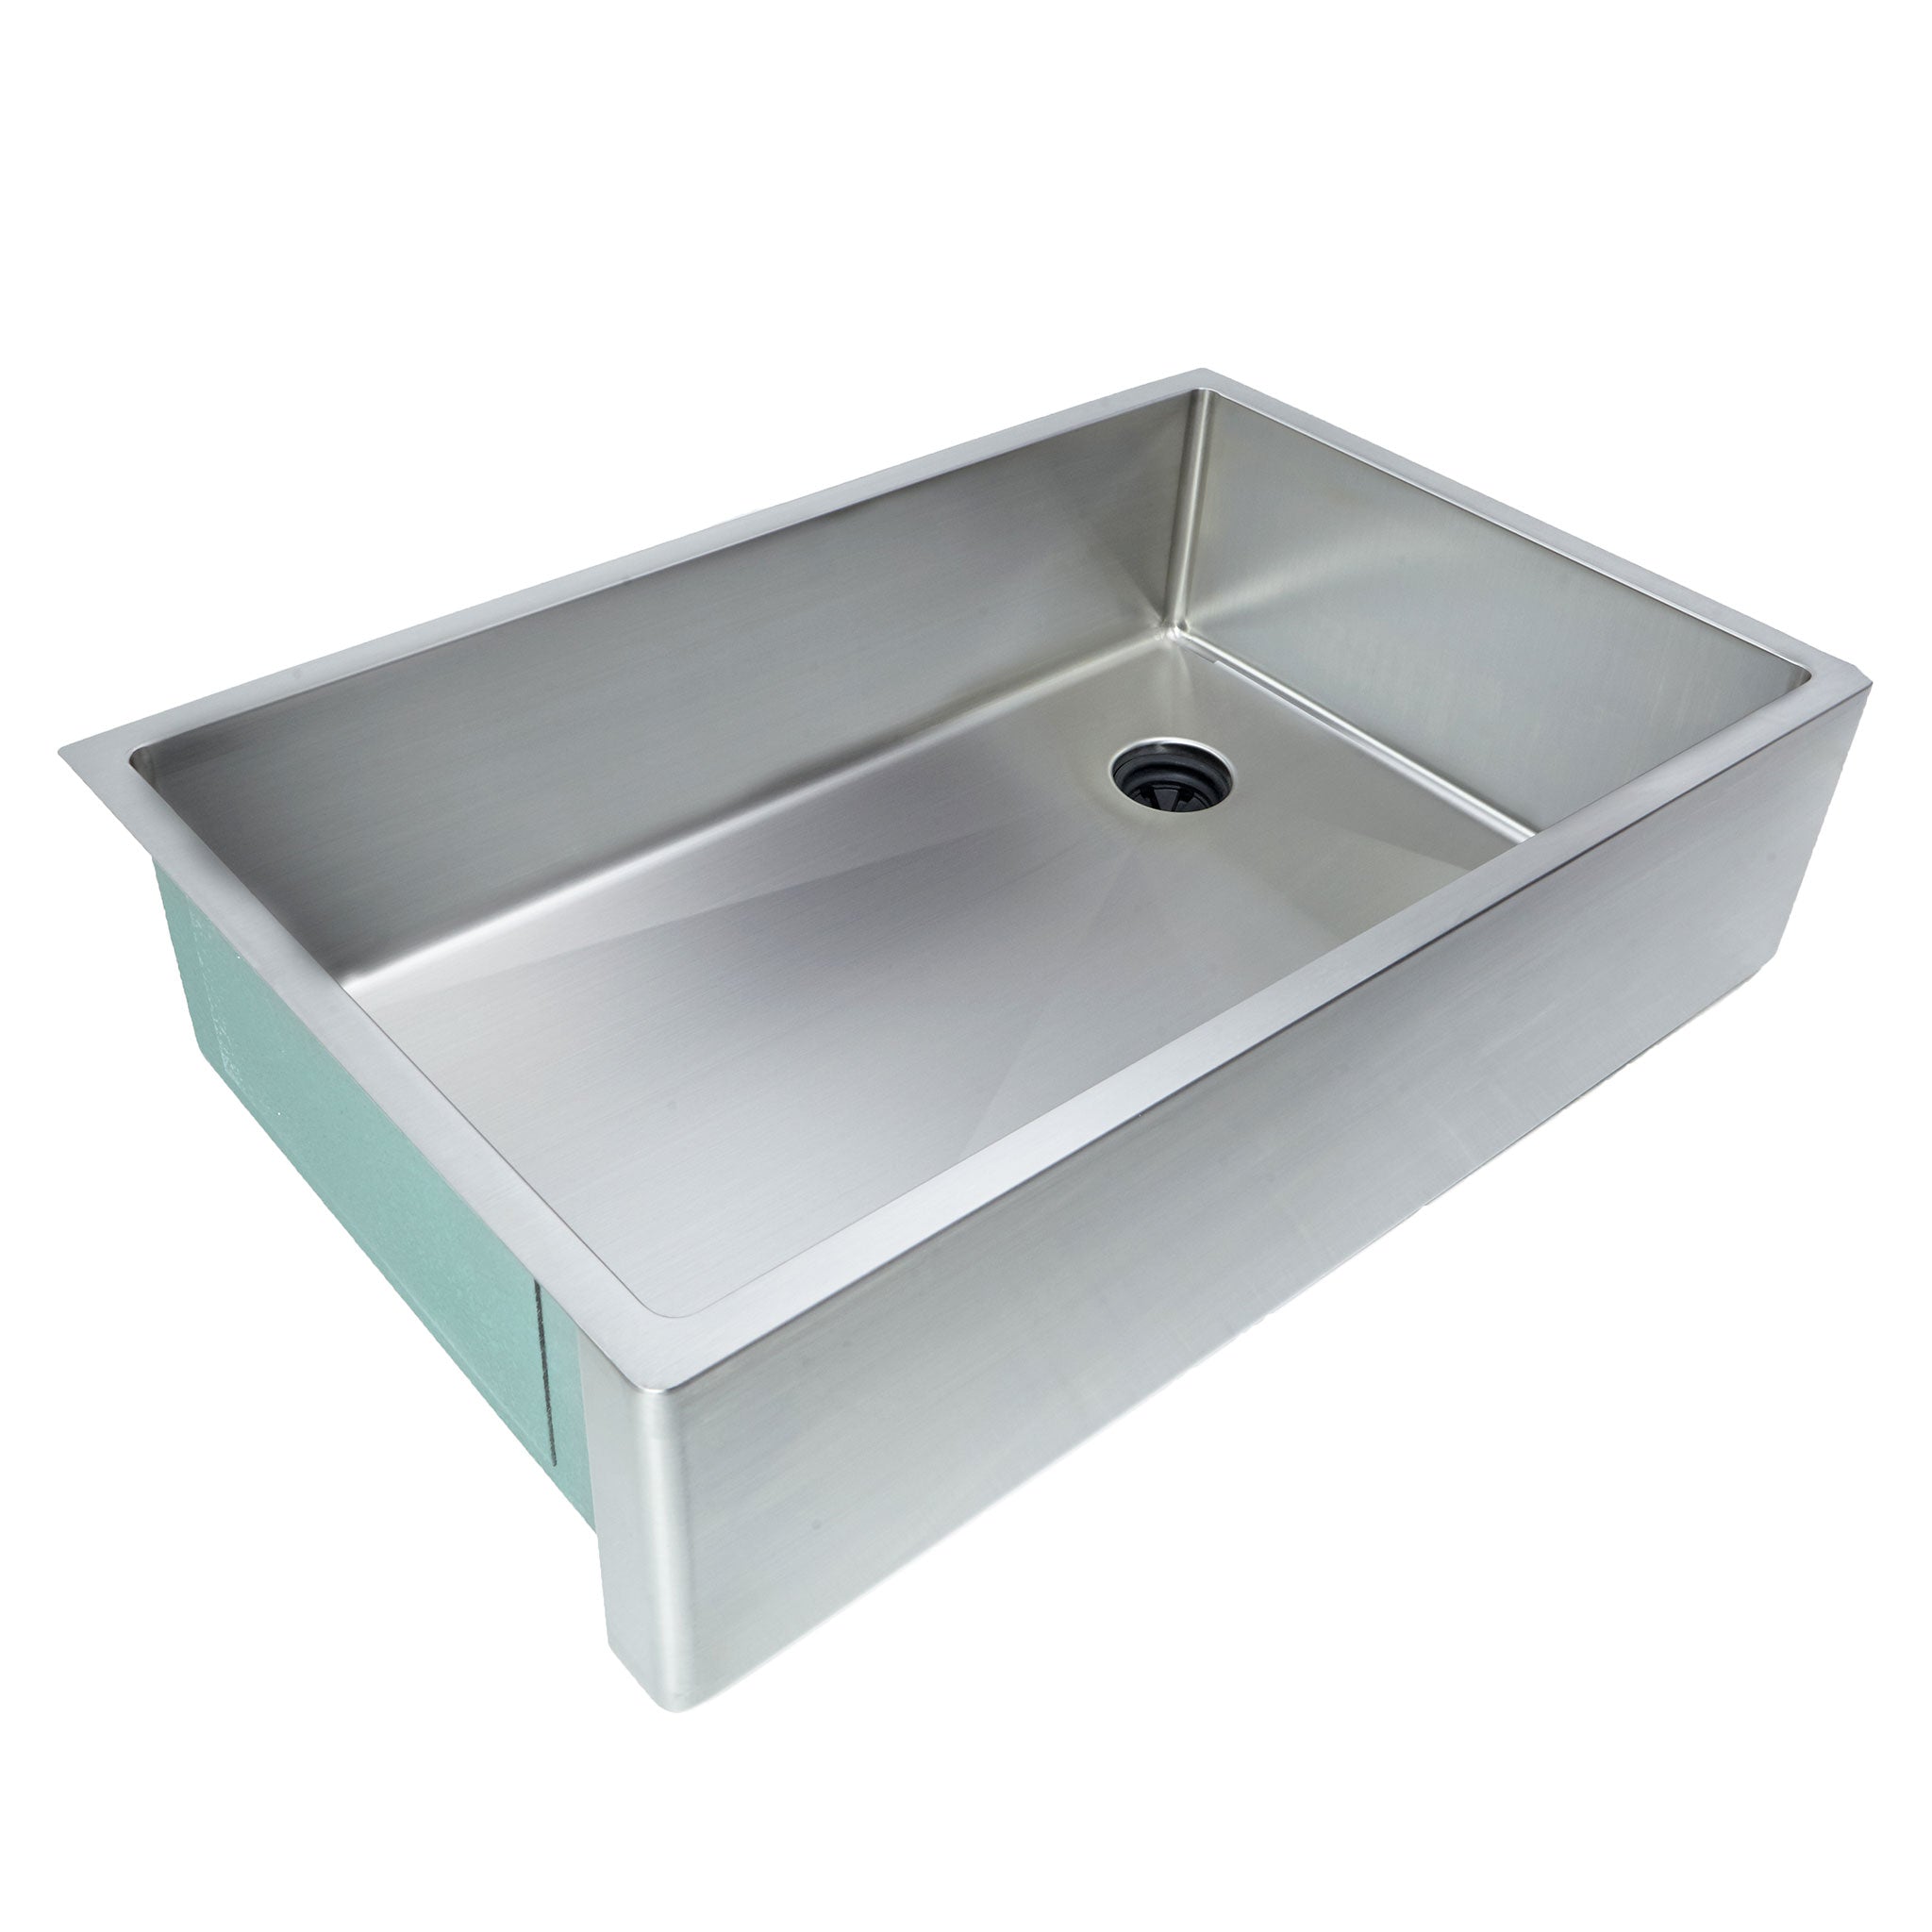 32 inch 16 gauge stainless steel single basin farmhouse apron front kitchen sink with offset drain on the right